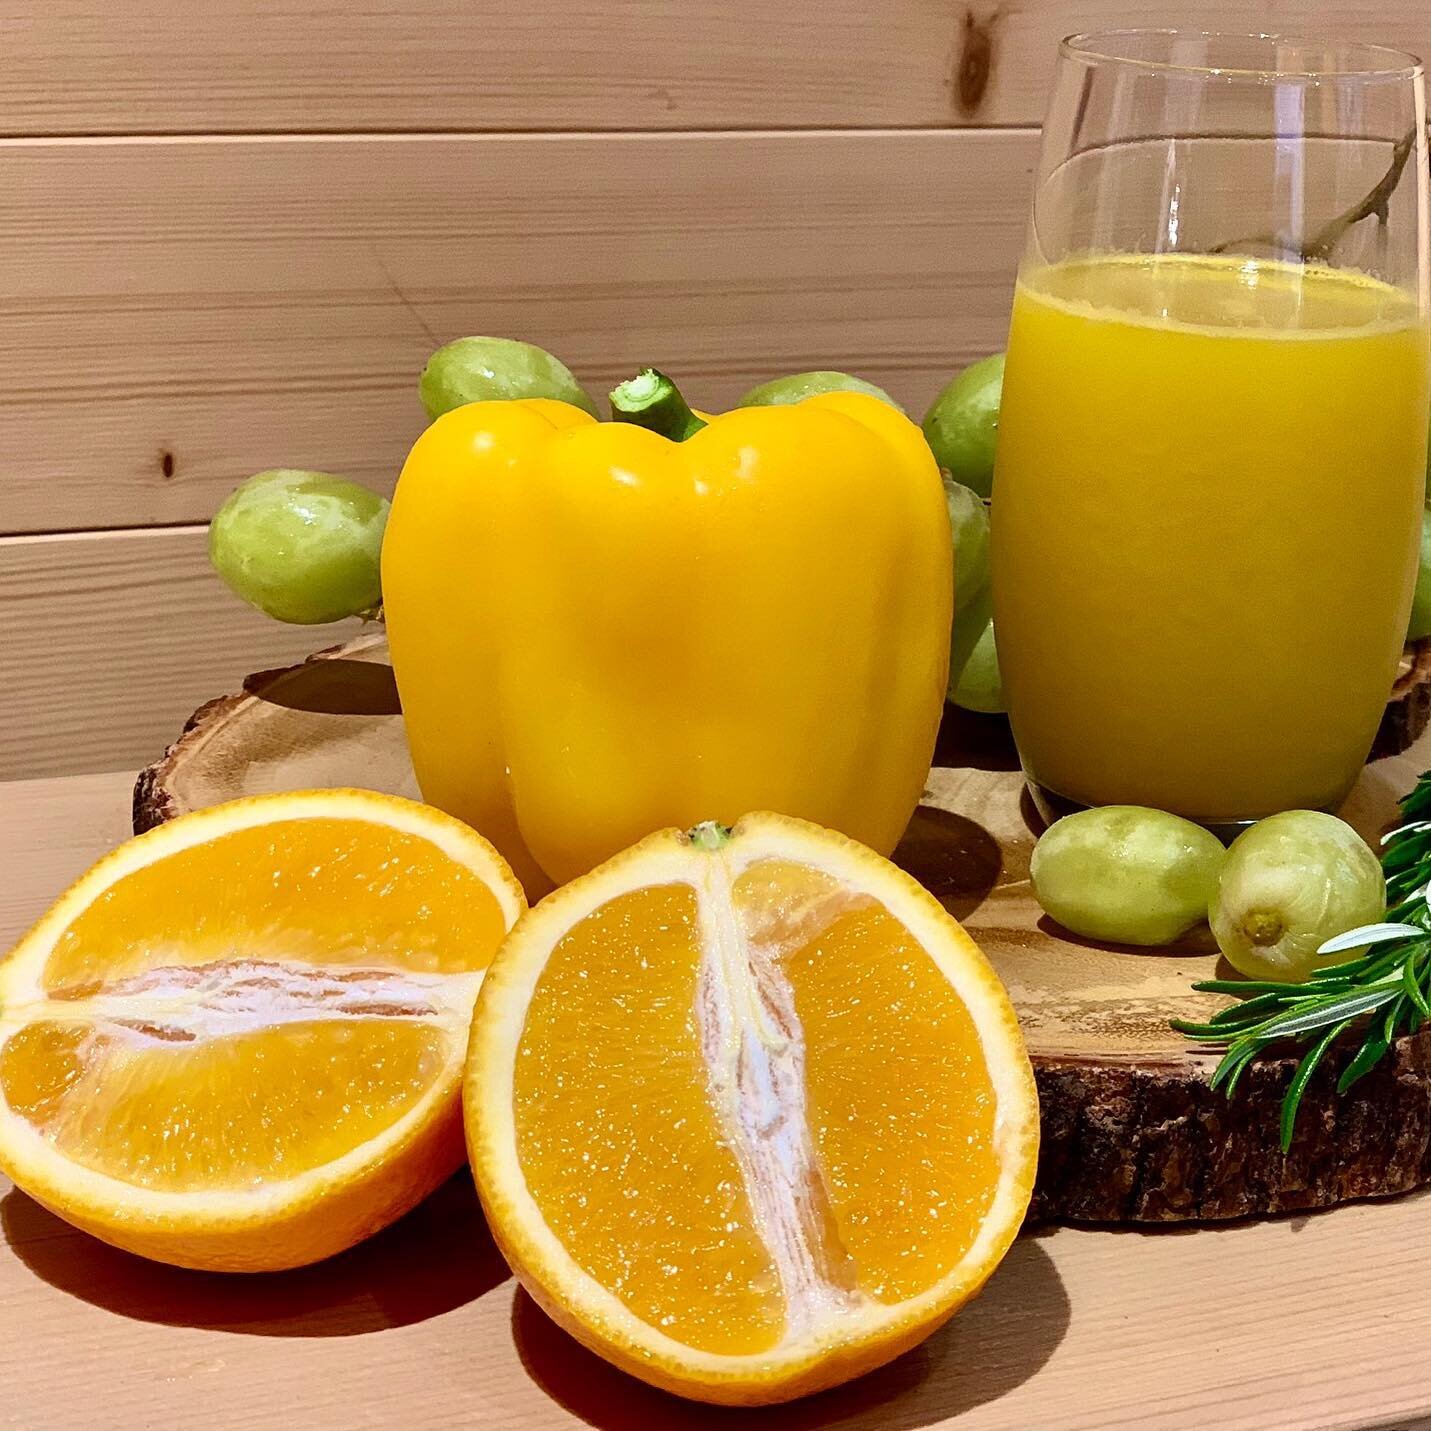 The acidity from the orange and the sweetness from the yellow bell pepper... wanna have a taste of this delightful combo? #rejuvenateyourskin #nourishyourbody #applecucumberjuice #freshjuice #realfruitsmoothie #freshfruittea #sweetbon #cinnamonbuns #